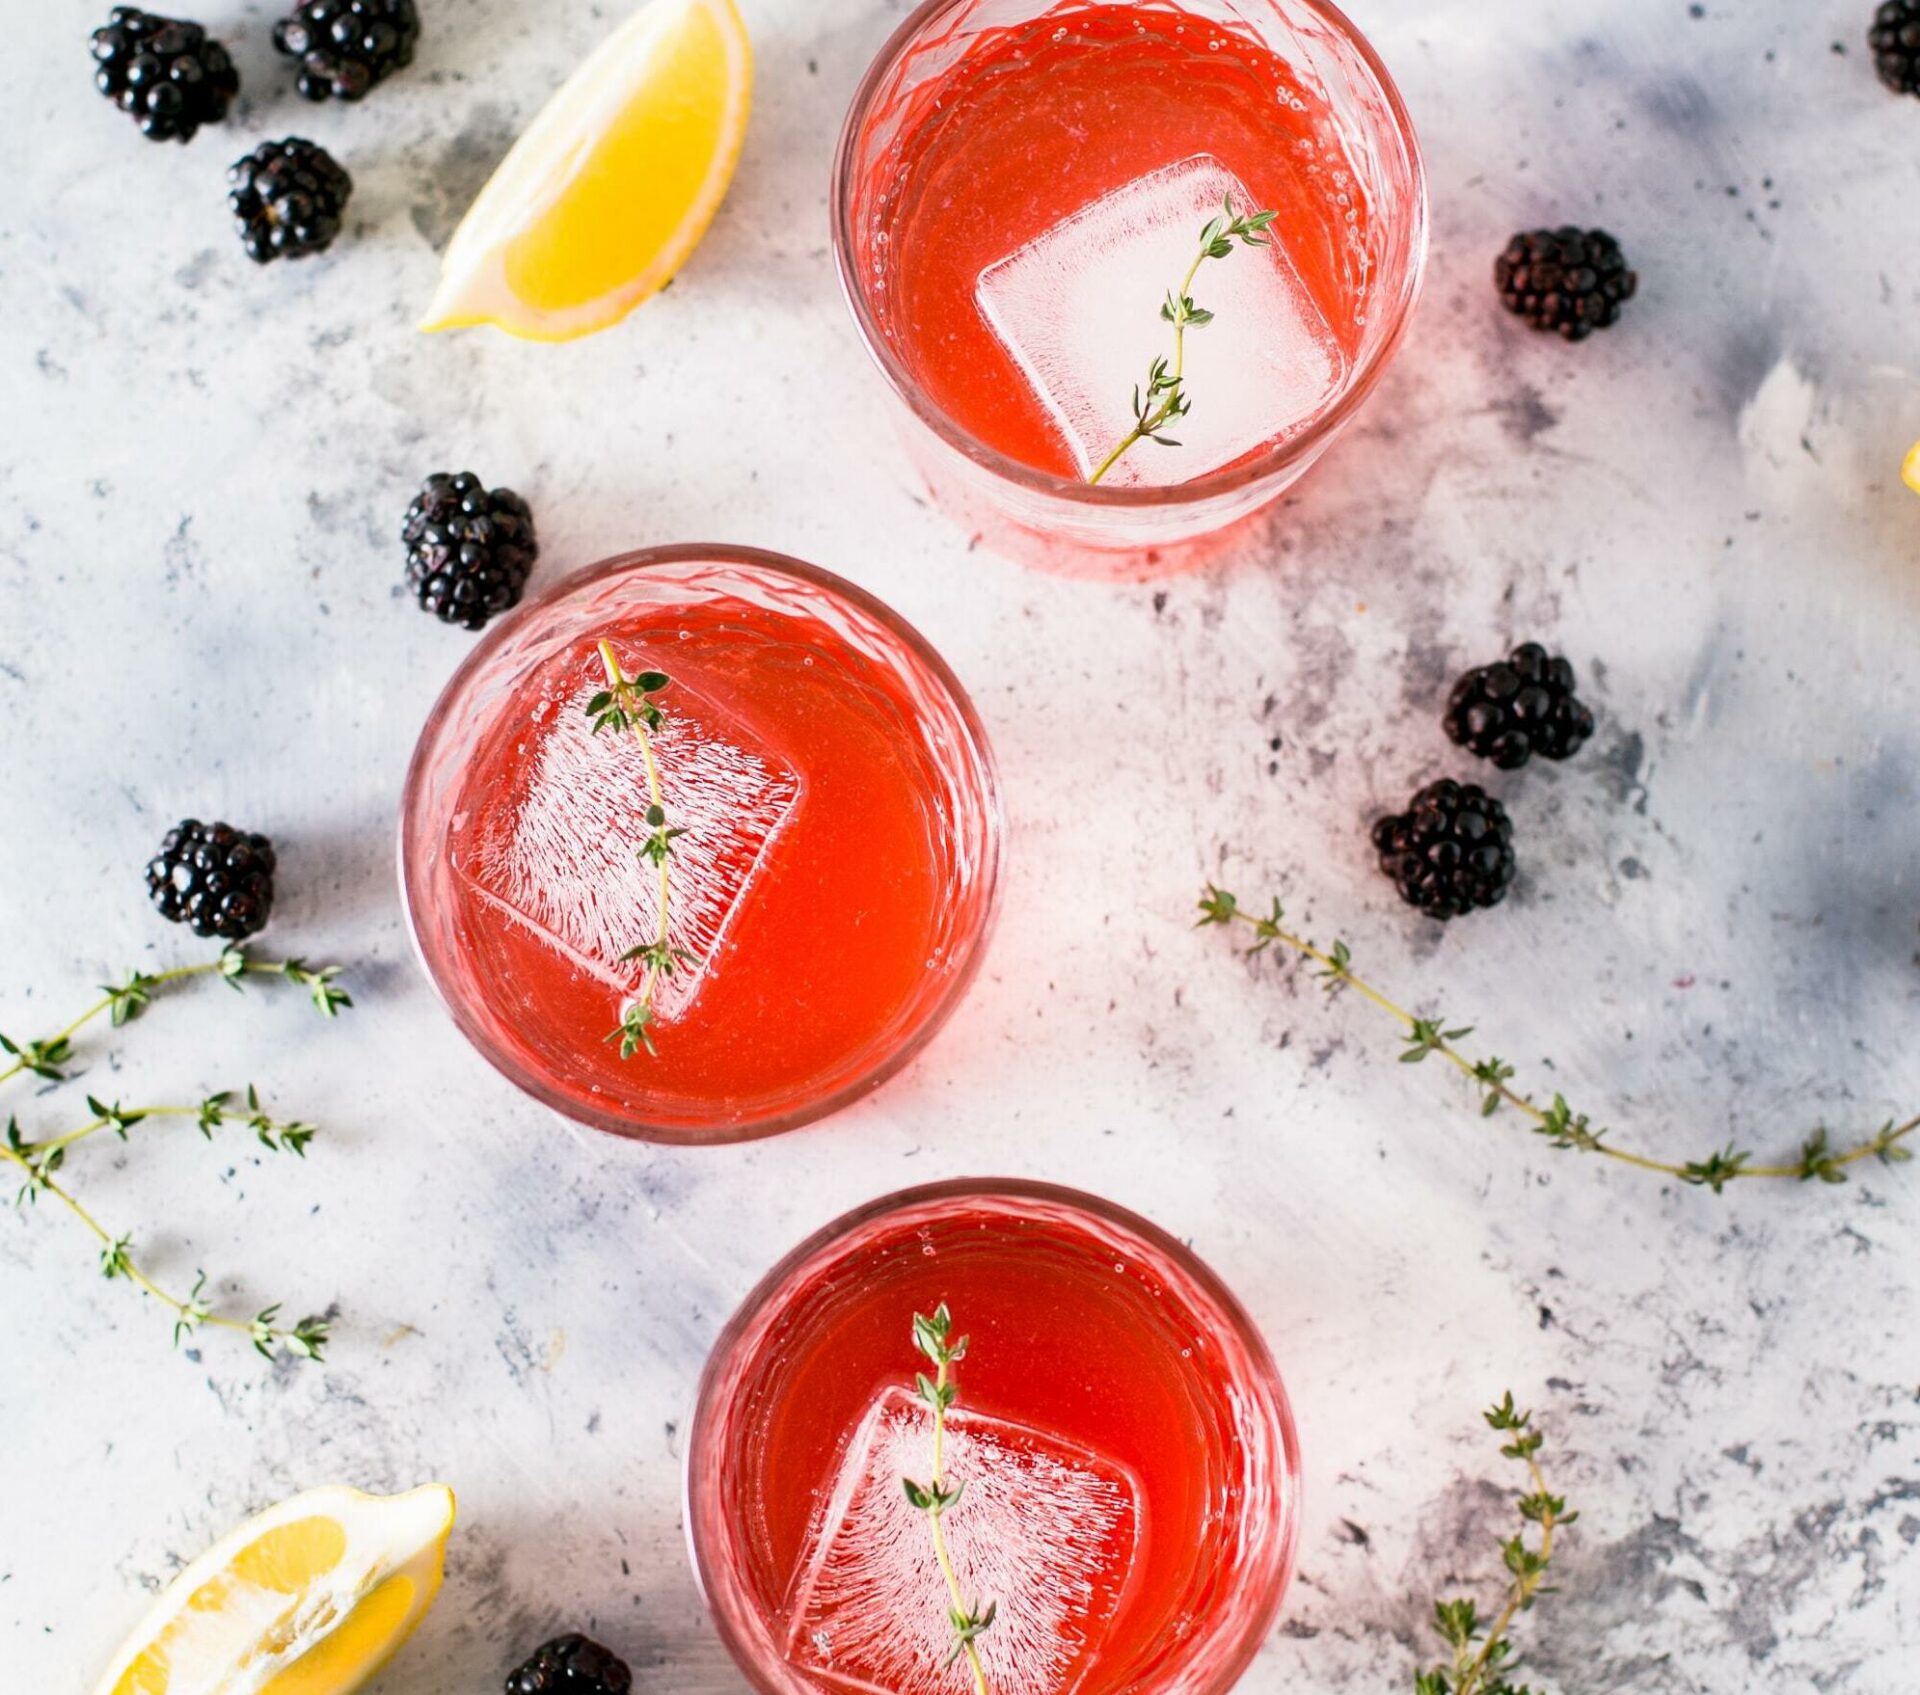 Three glasses of alcohol-free blackberry lemonade with ice and thyme.